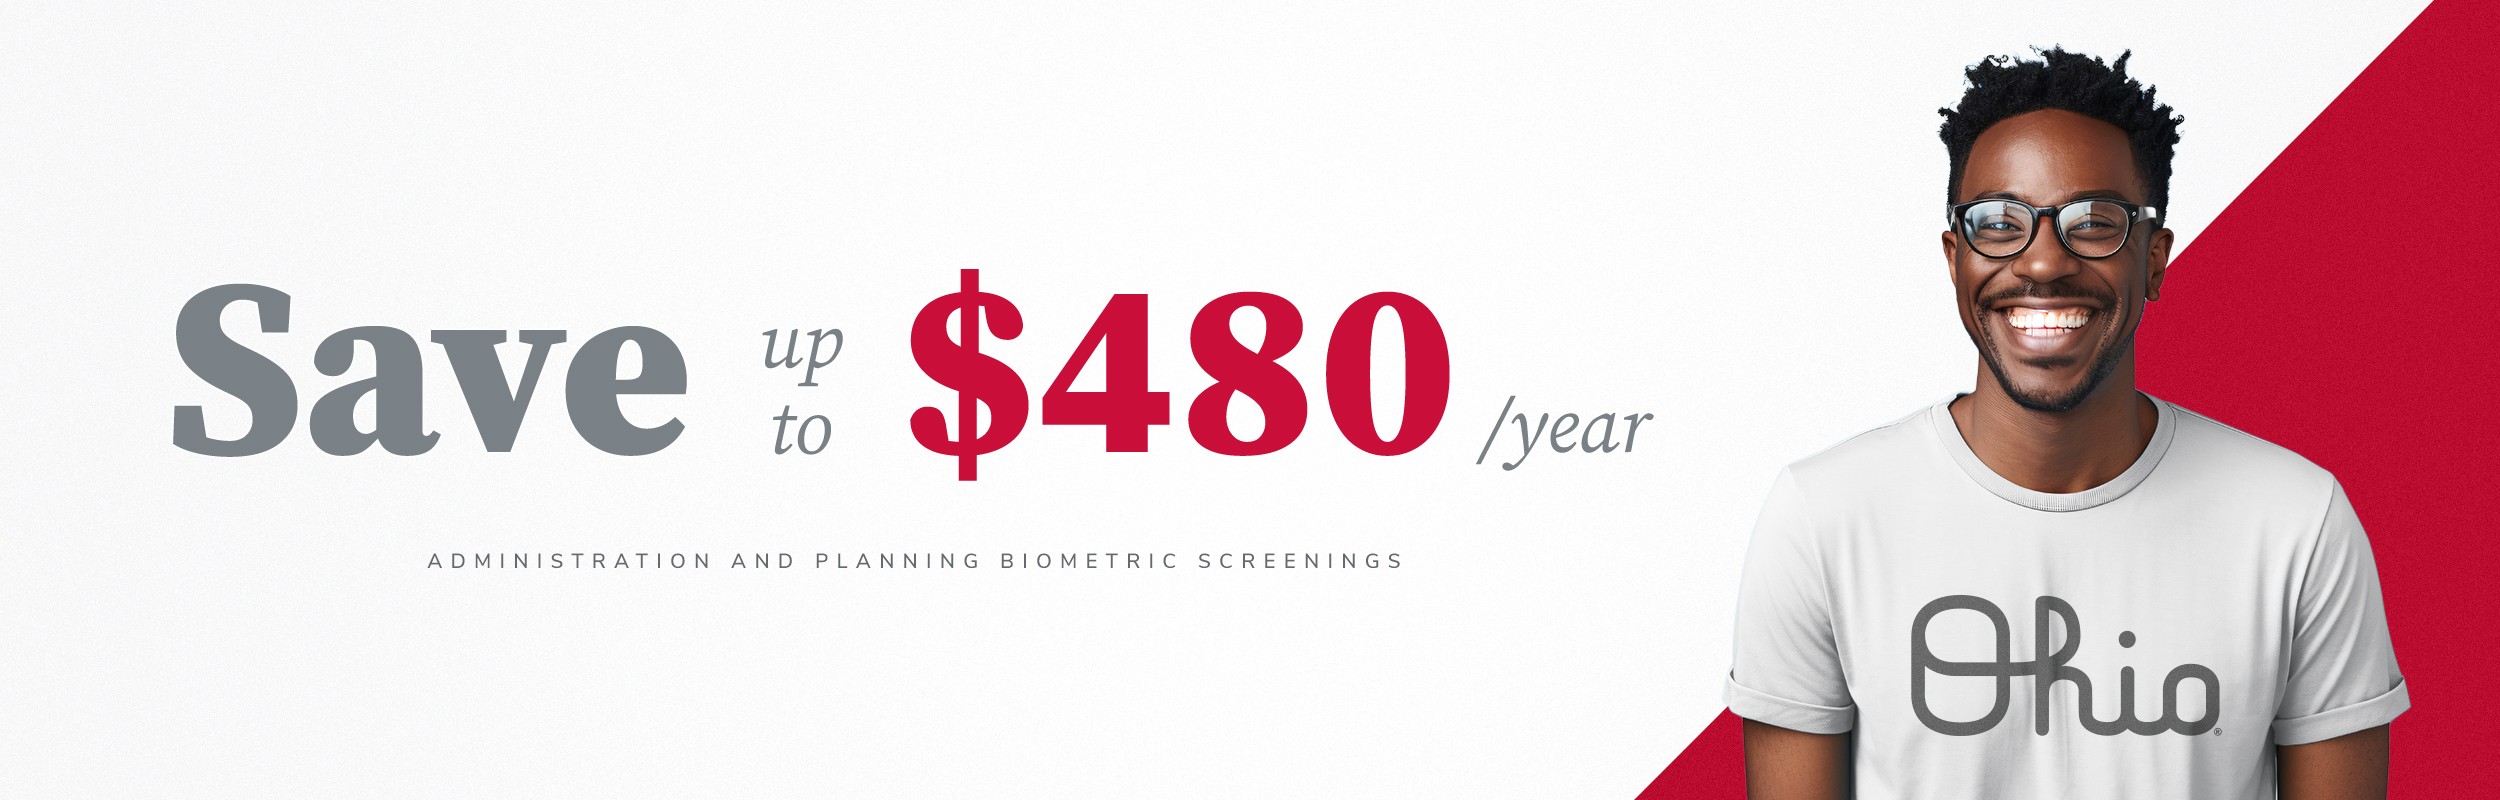 Graphic with text "Save up to $480 - Administration and Planning Biometric Screenings" and a man with the Script Ohio logo on his shirt